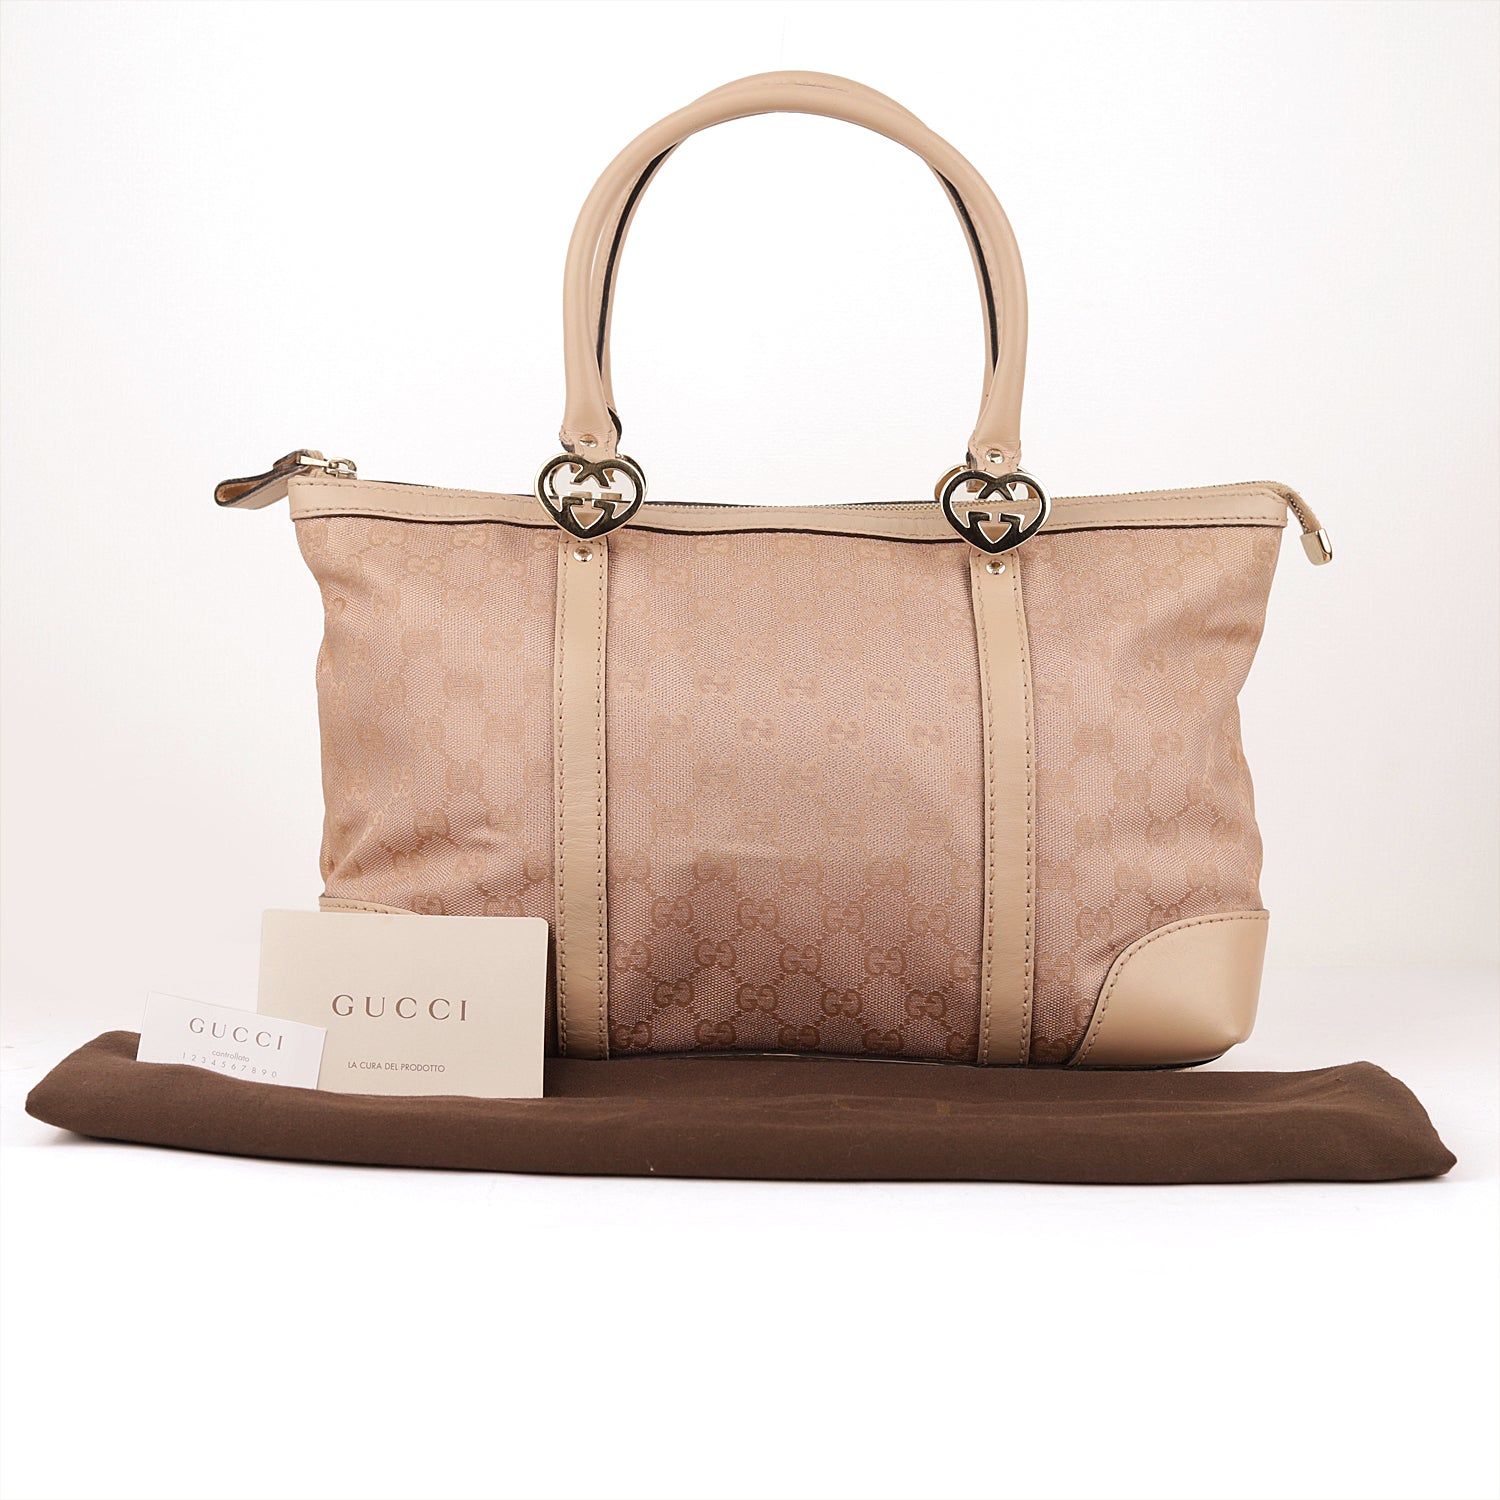 Gucci Beige/Rose Gold Metallic GG Fabric &amp; Leather Tote